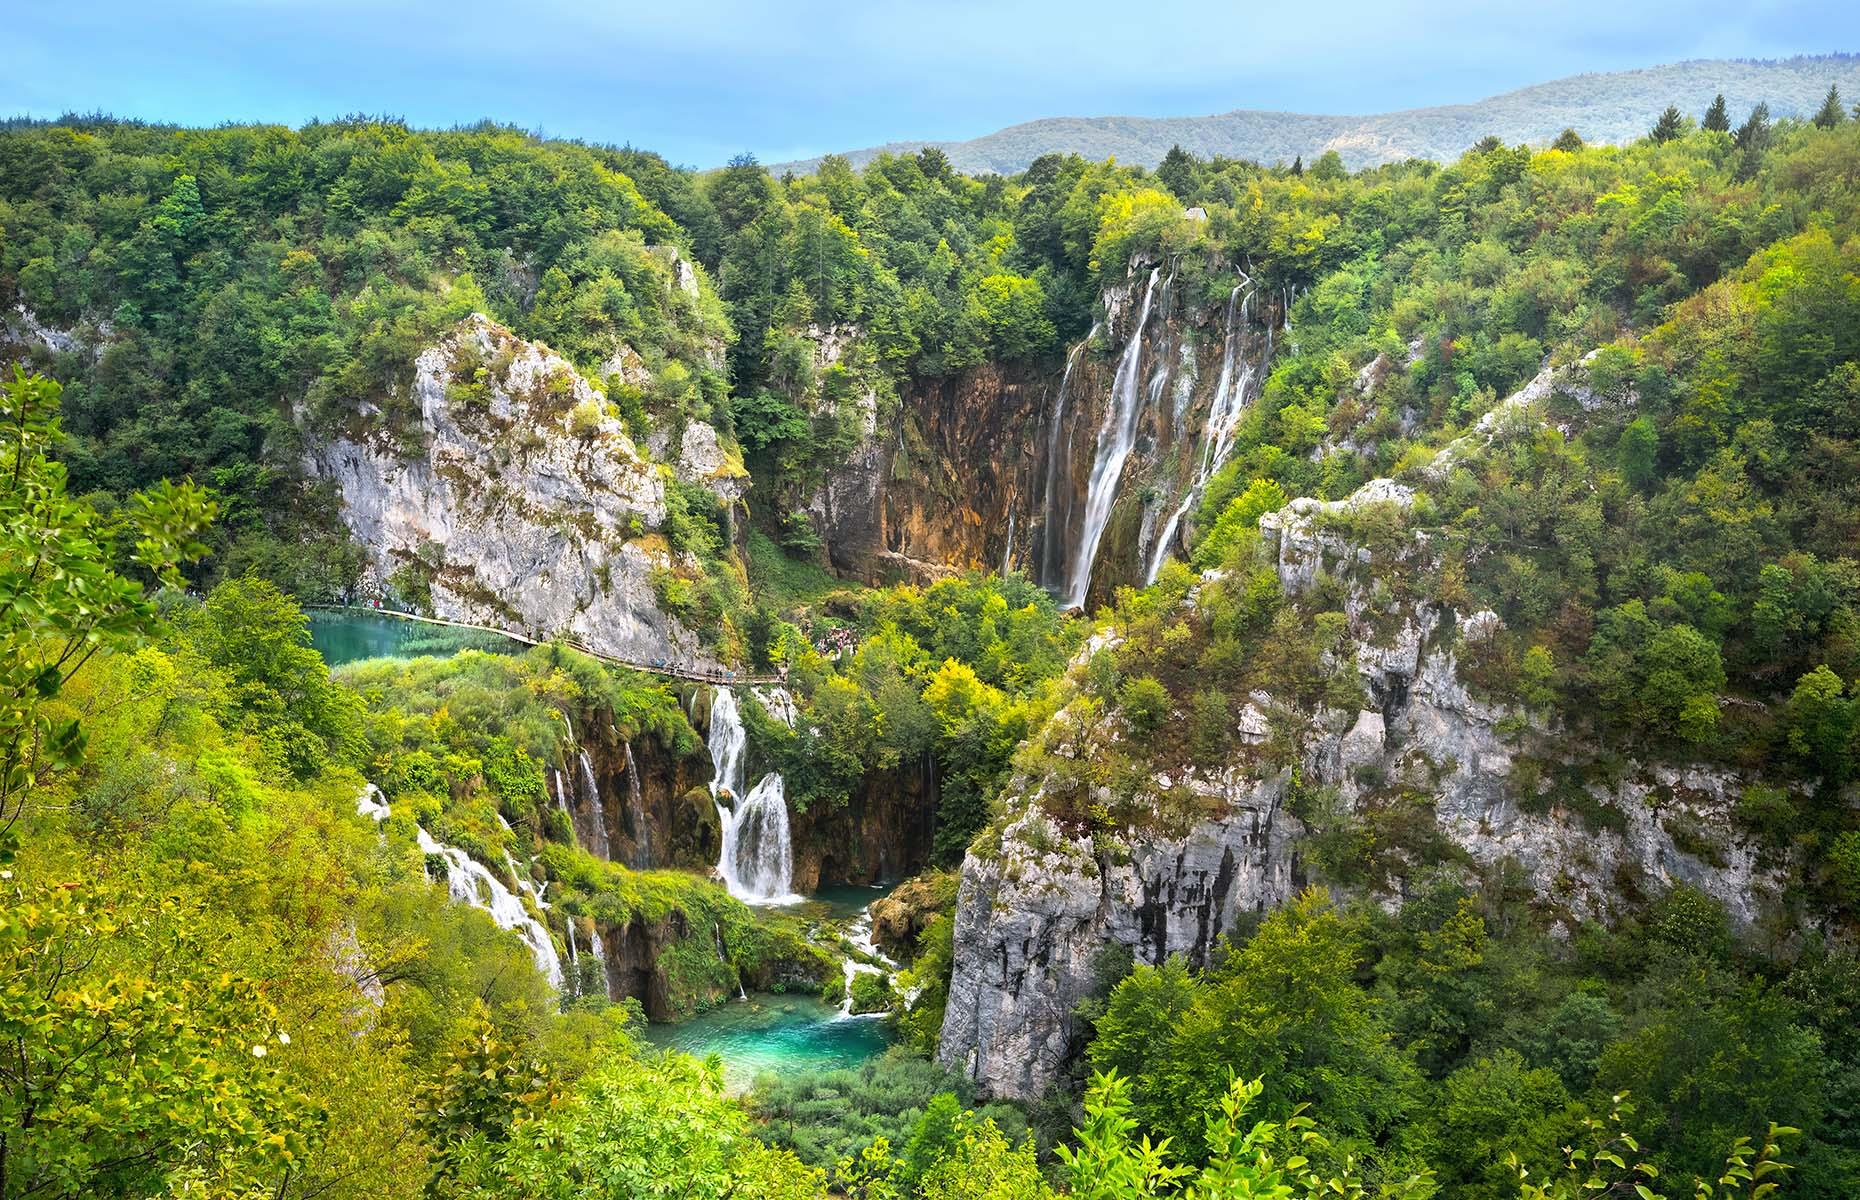 Covering a spectacular expanse of almost 115 square miles (298sq km), Plitvice Lakes National Park in Croatia has been an UNESCO World Heritage Site since 1979. It's celebrated for its 16 striking lakes, which are interconnected by a series of dramatic waterfalls that cascade down into a picturesque limestone canyon. The surrounding woodlands are renowned for their wildlife, including bears and wolves.